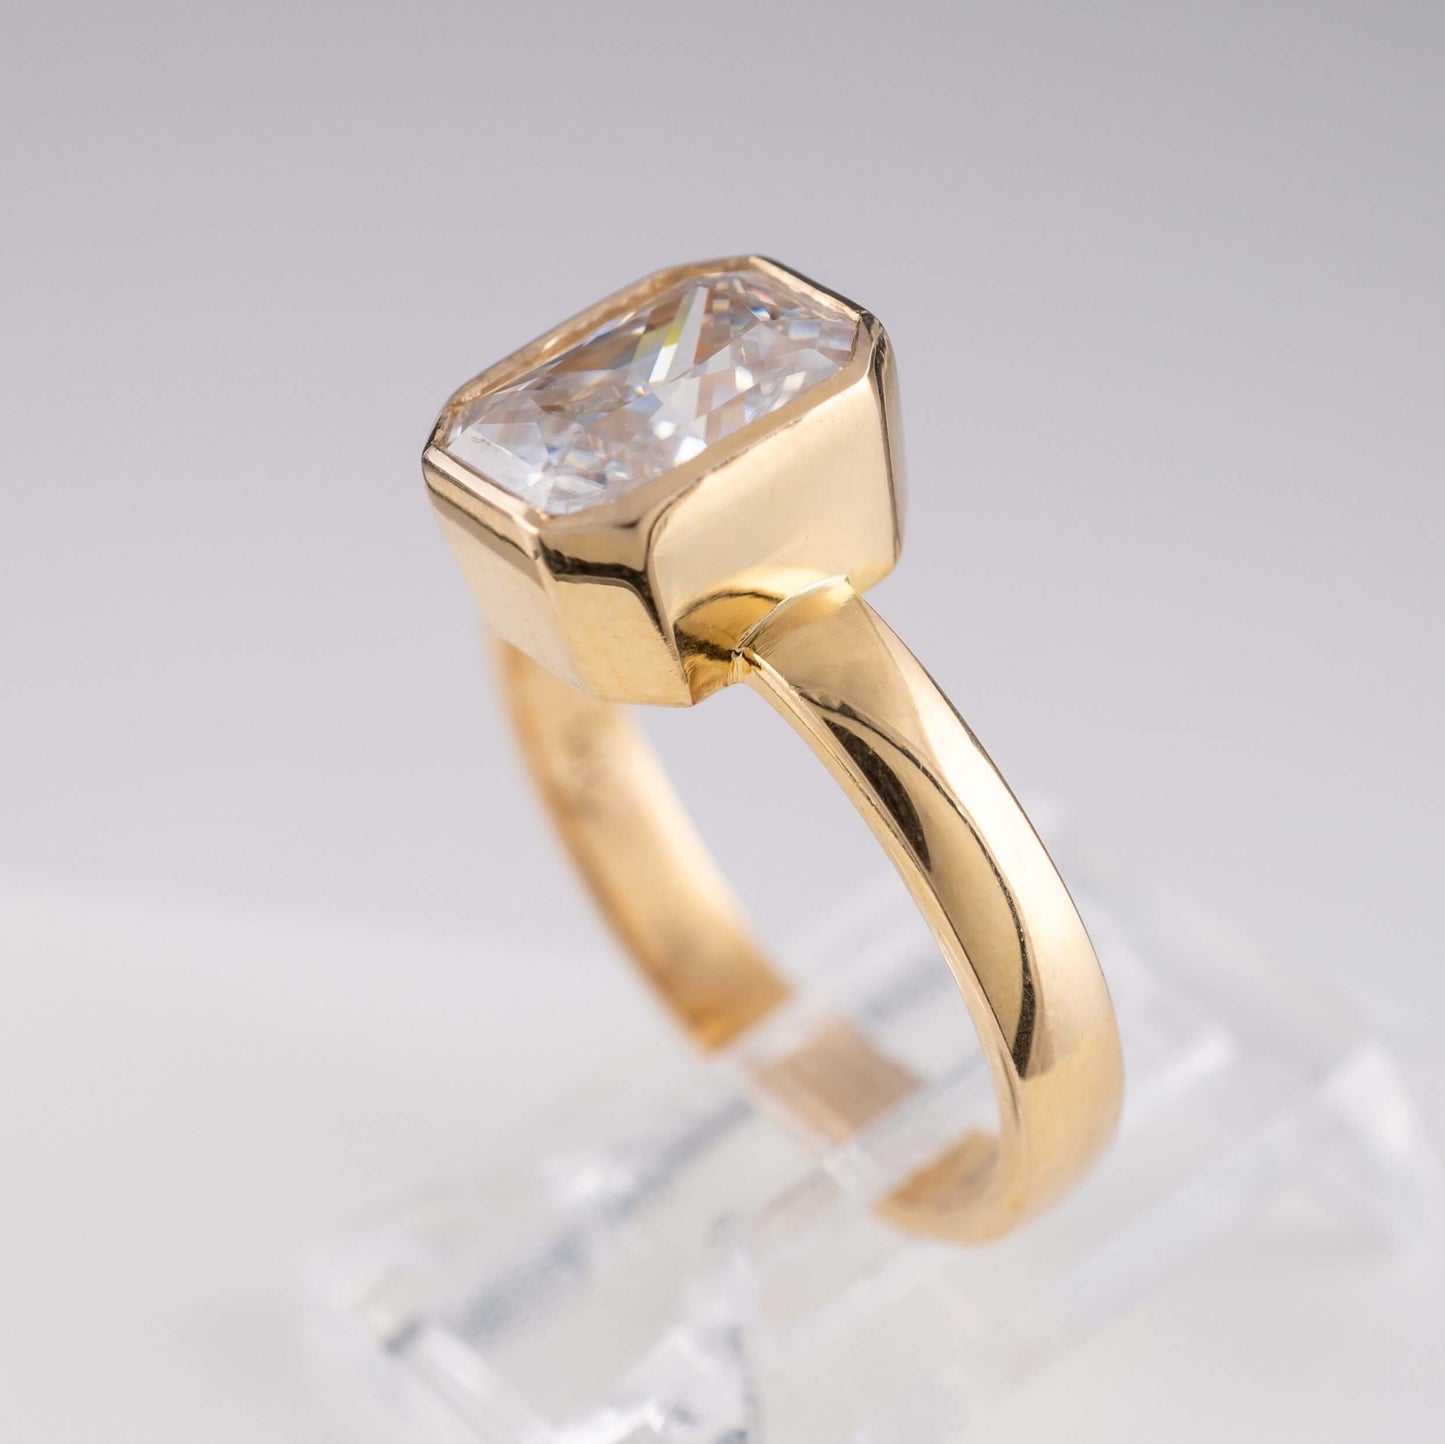 Hunters Fine Jewellery: 14K Moissanite Octagon Ring, Size K - Complete Hallmark Certification Included